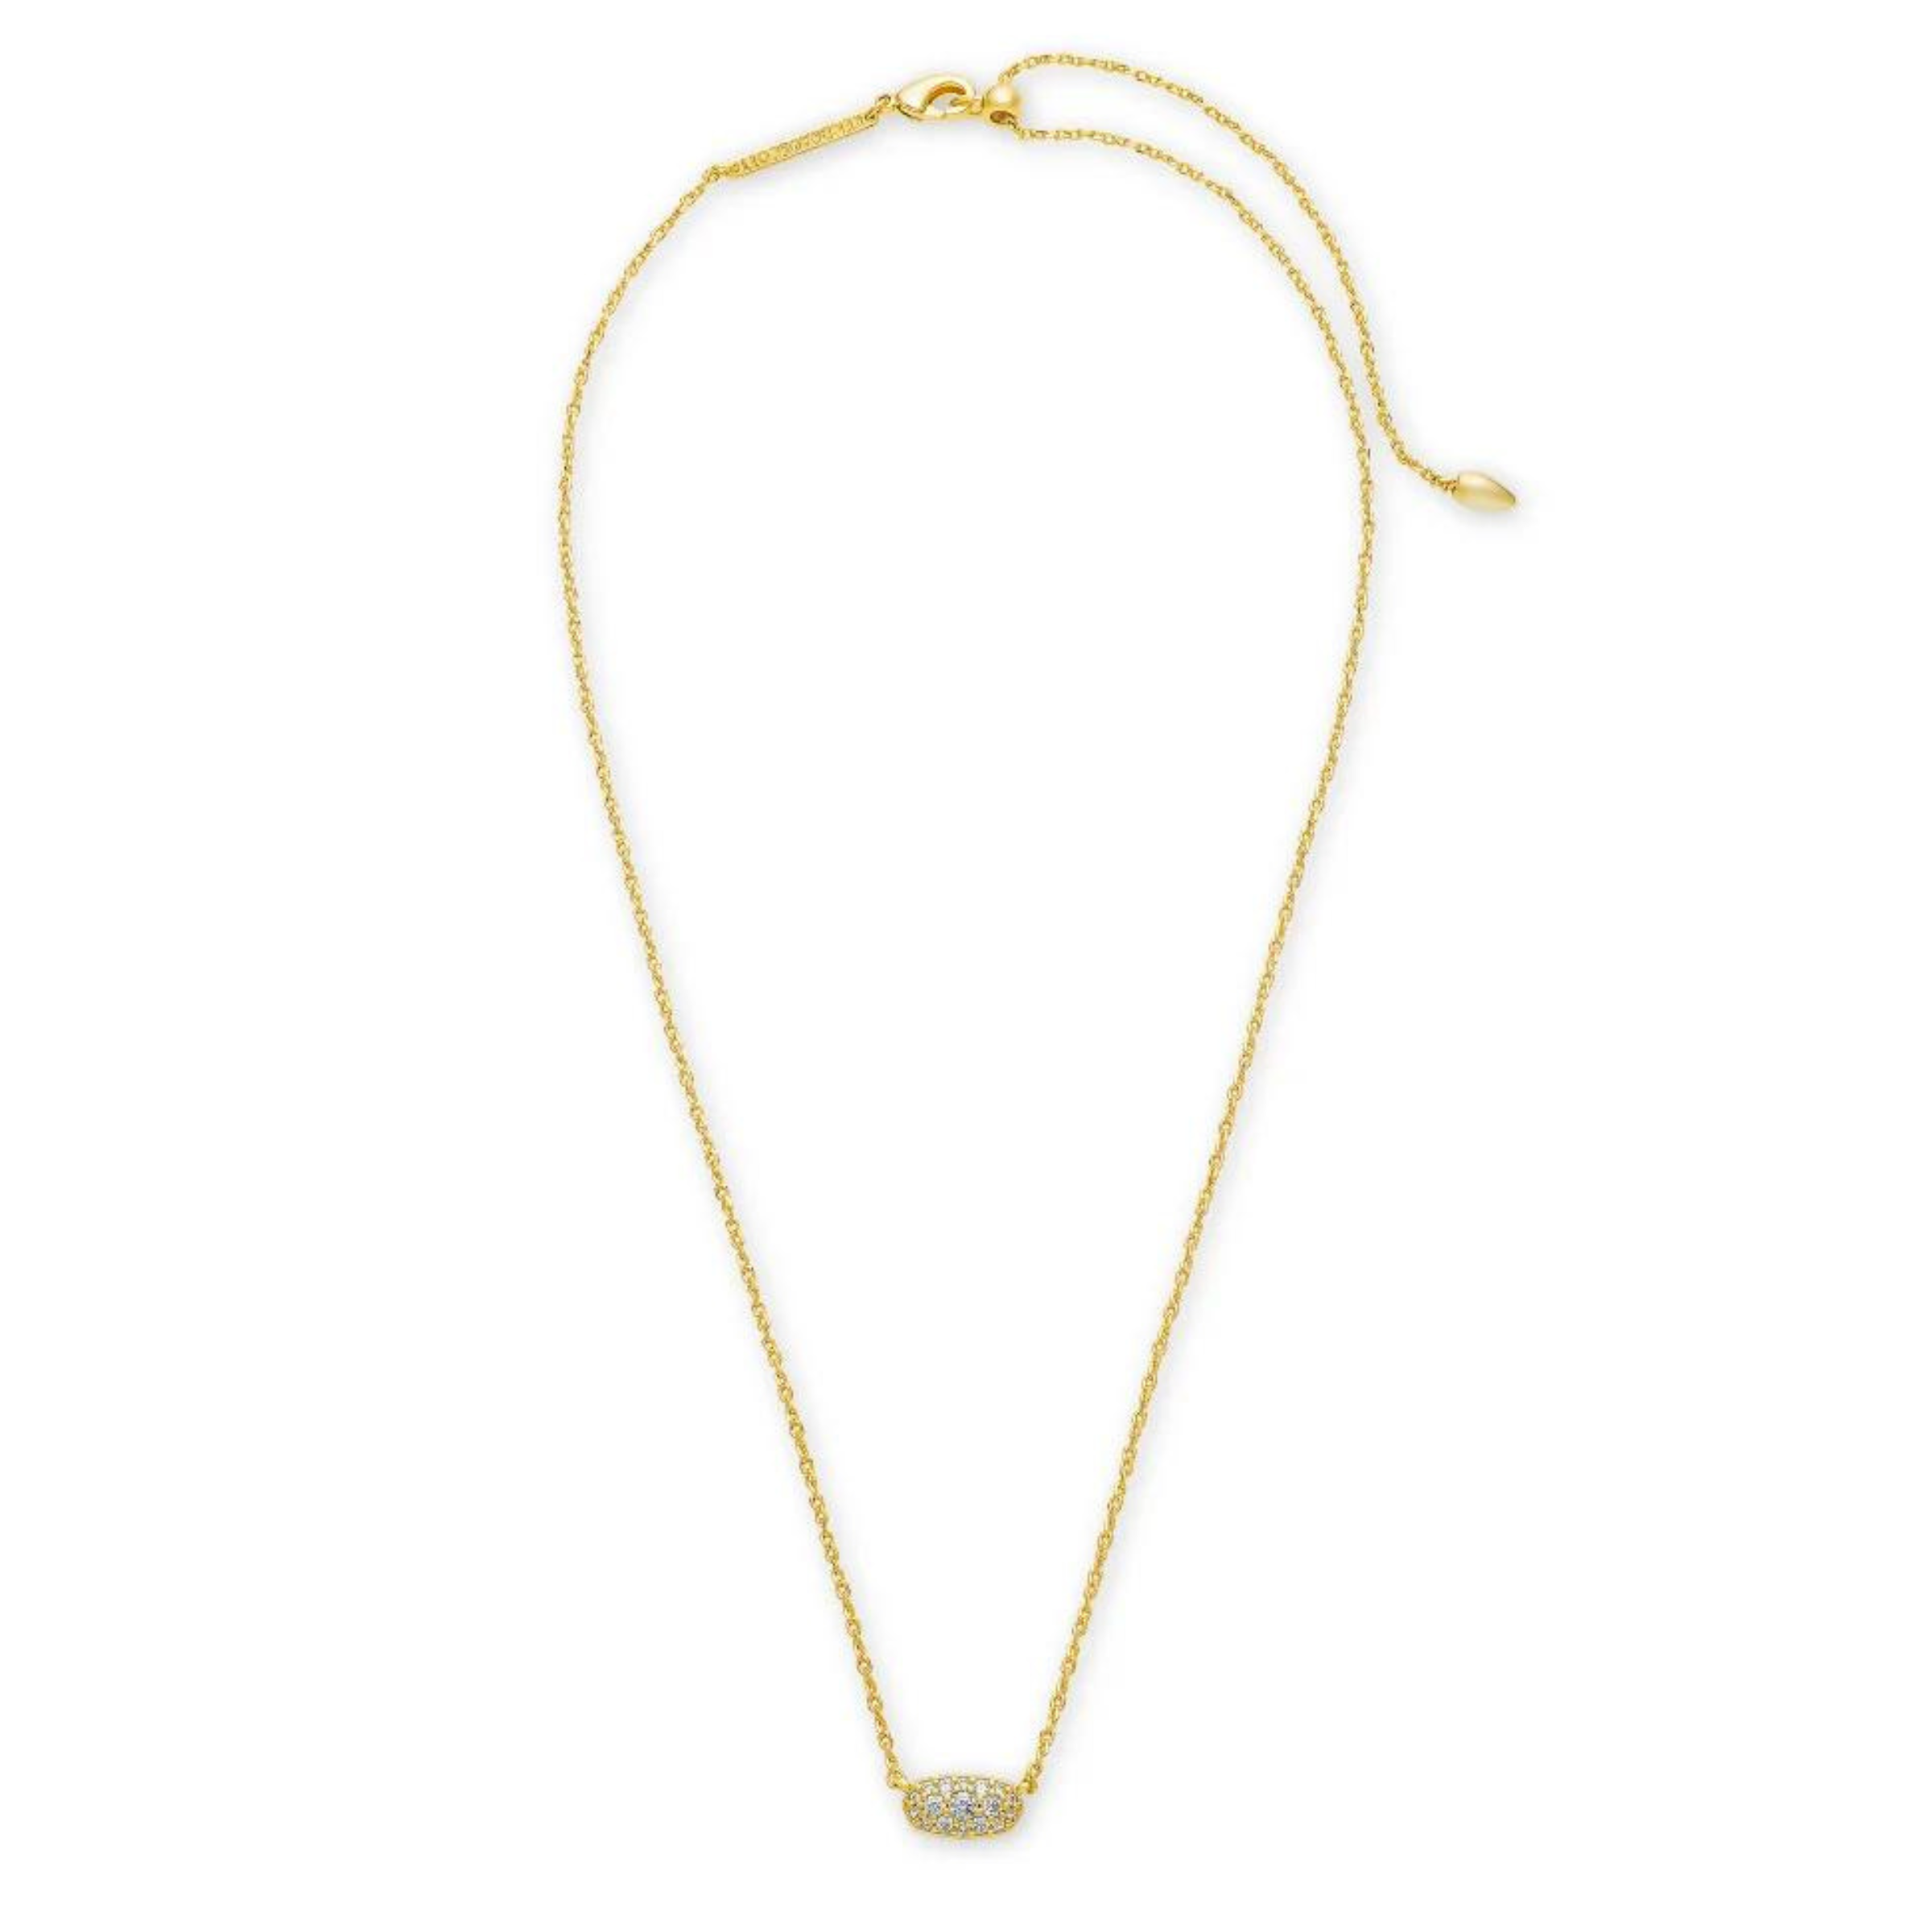 Kendra Scott | Grayson Gold Pendant Necklace in White Crystal - Giddy Up Glamour Boutique